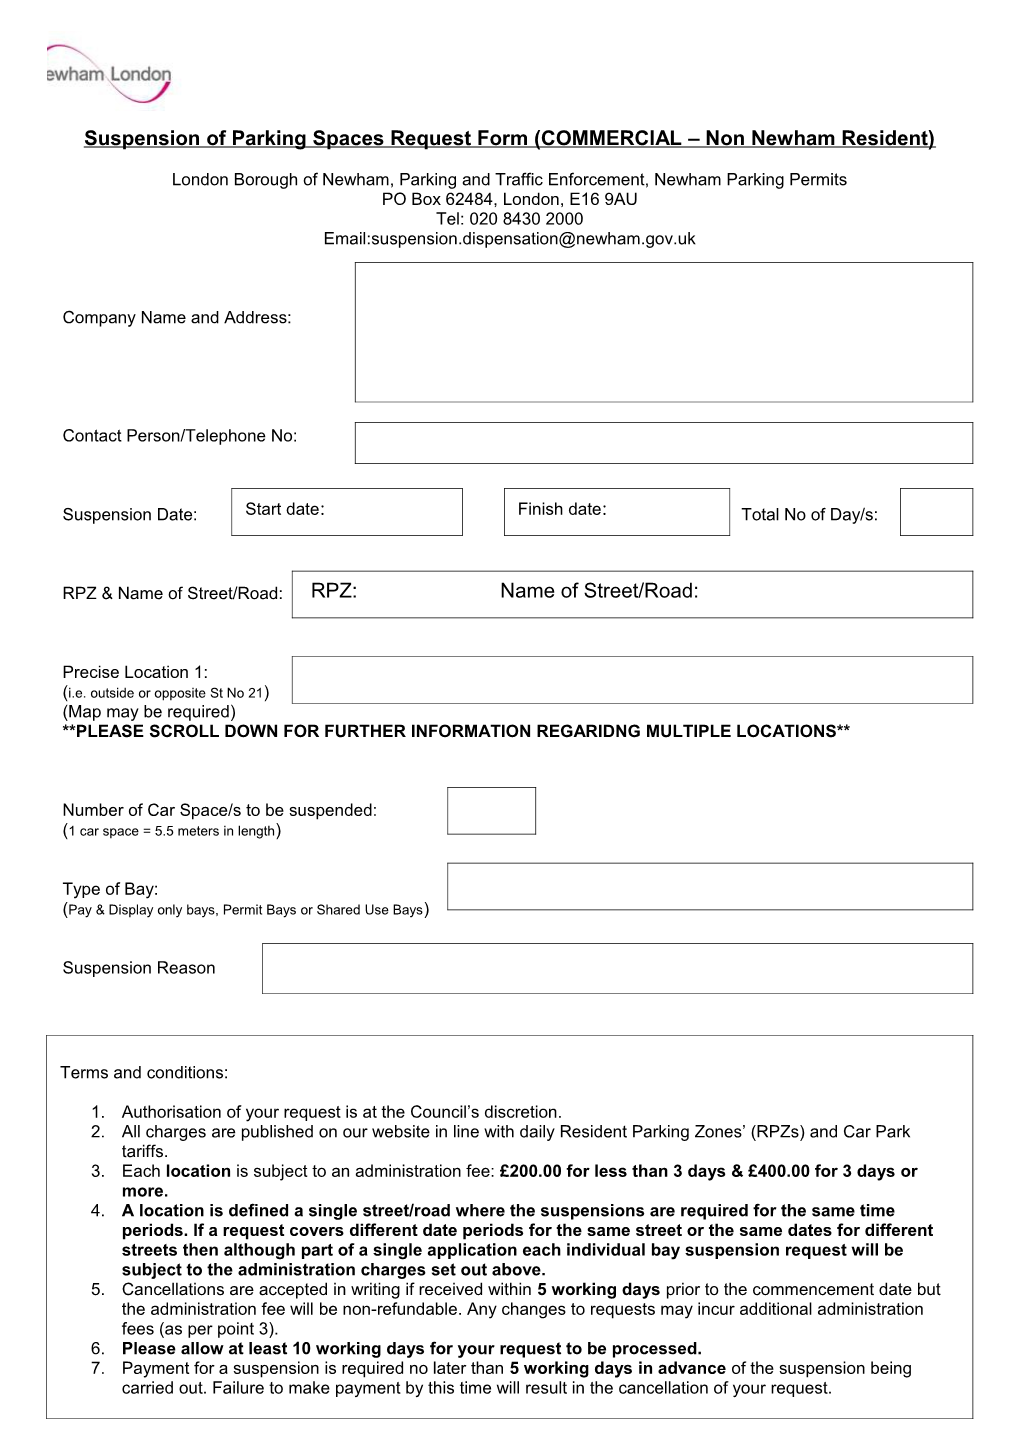 Suspension of Parking Spaces Request Form - Commercial (Non Newham Residents)